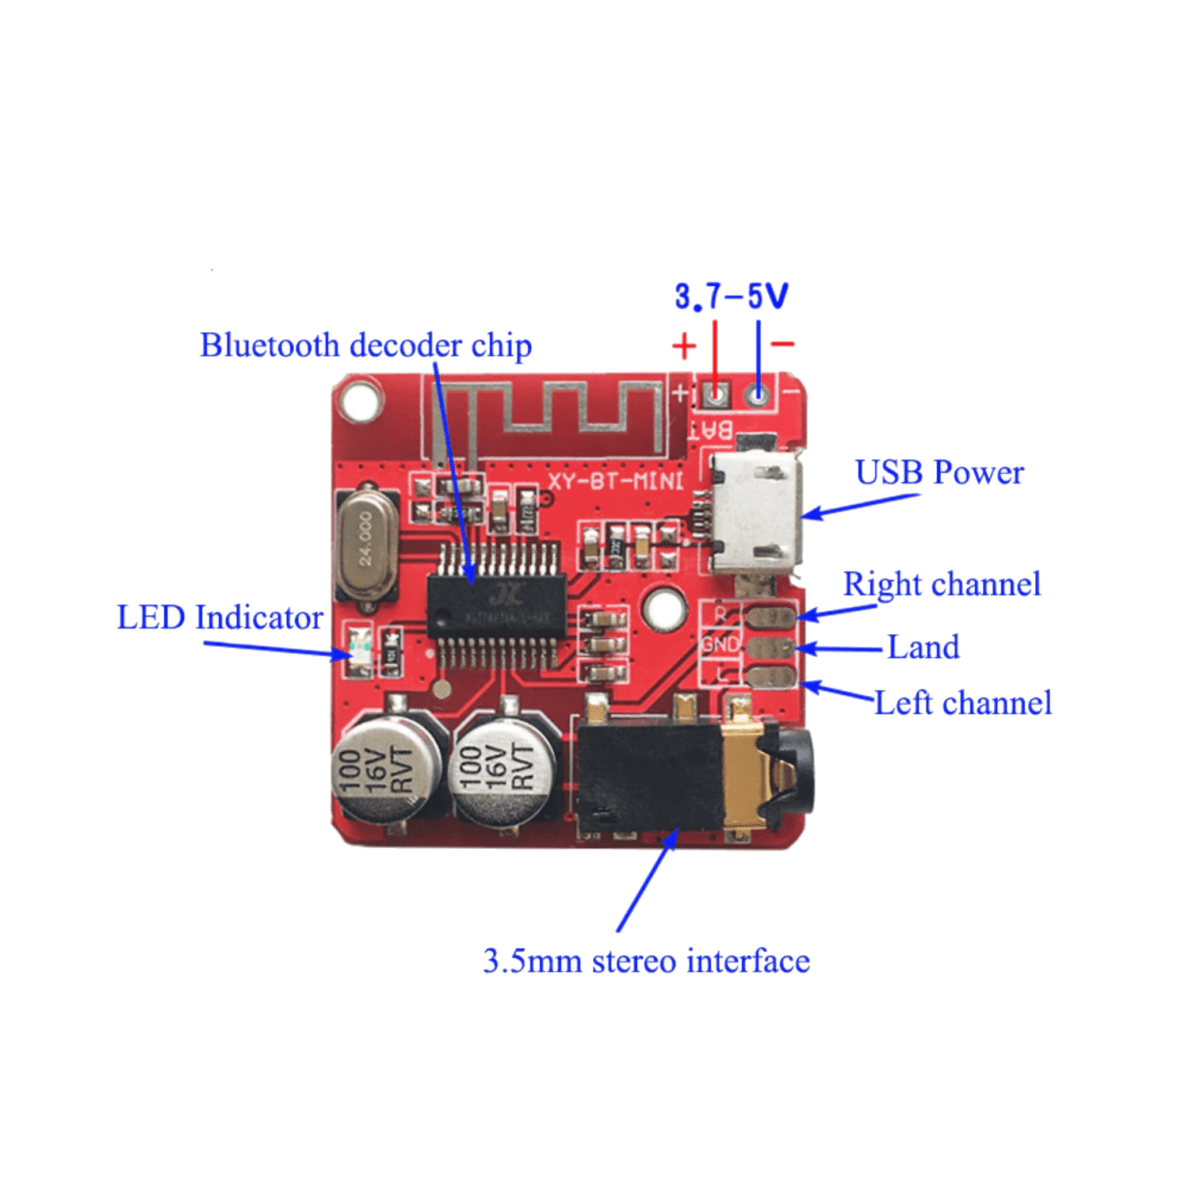 DIY Bluetooth Audio Receiver Board on a white background